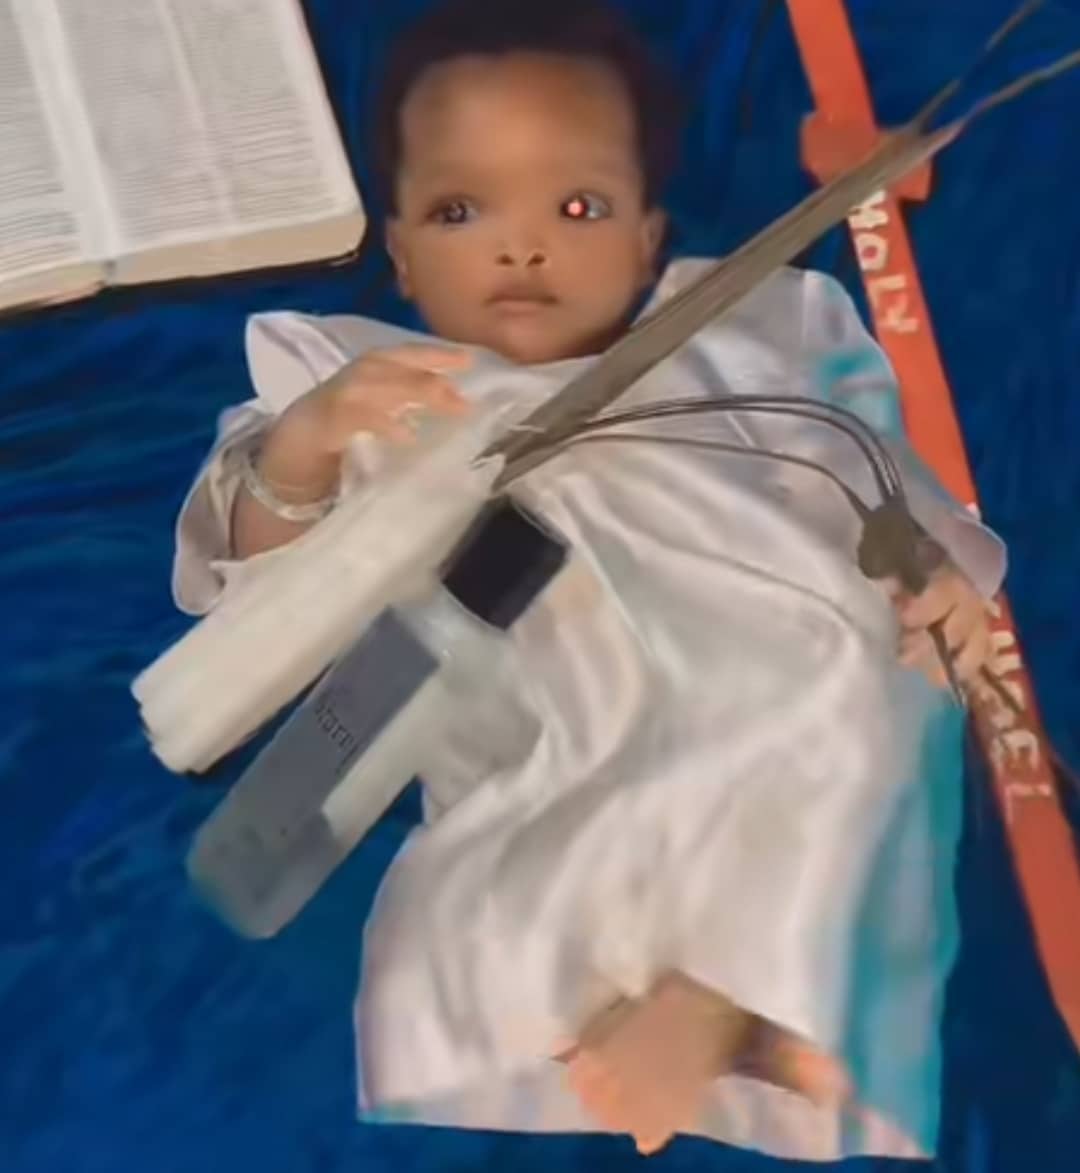 Celestial church Nigerians little baby reportedly spends 3 days trance